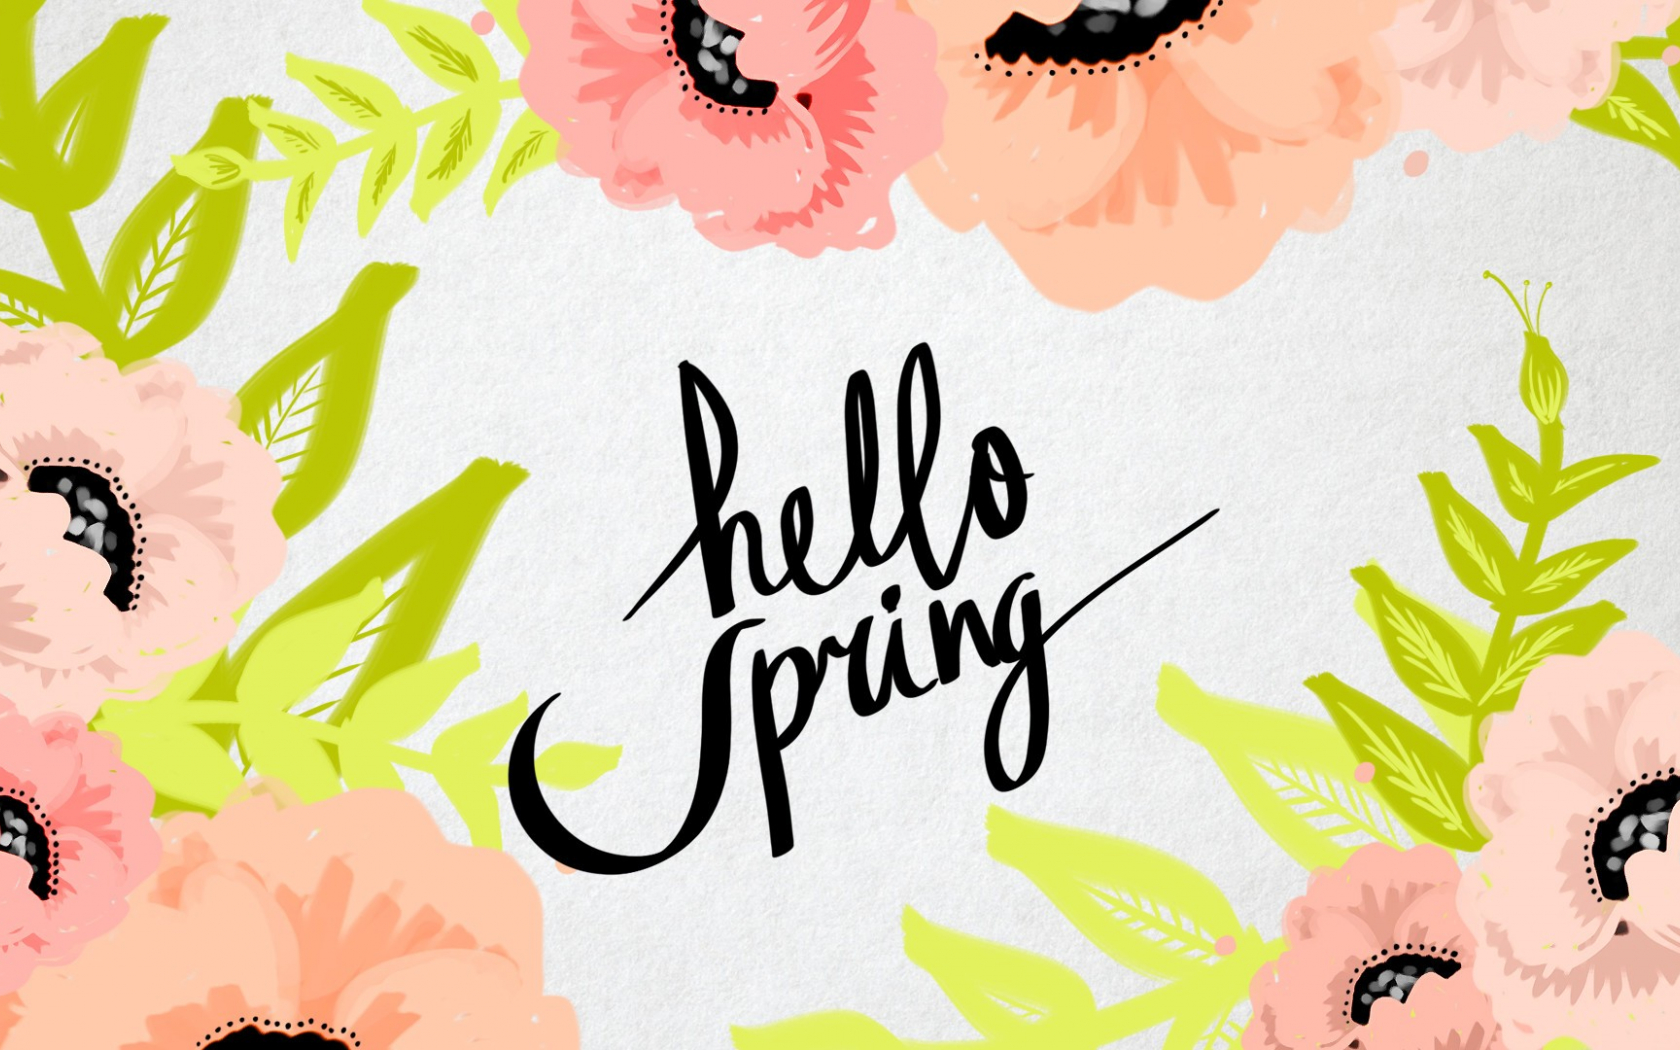 Free download Wallpaper Hello Spring 2021 Cute Wallpaper [1920x1080] for your Desktop, Mobile & Tablet. Explore Spring 2021 Wallpaper. Marvel's Avengers Game 2021 Wallpaper, 2021 Acura TLX Type S Wallpaper, Background Spring